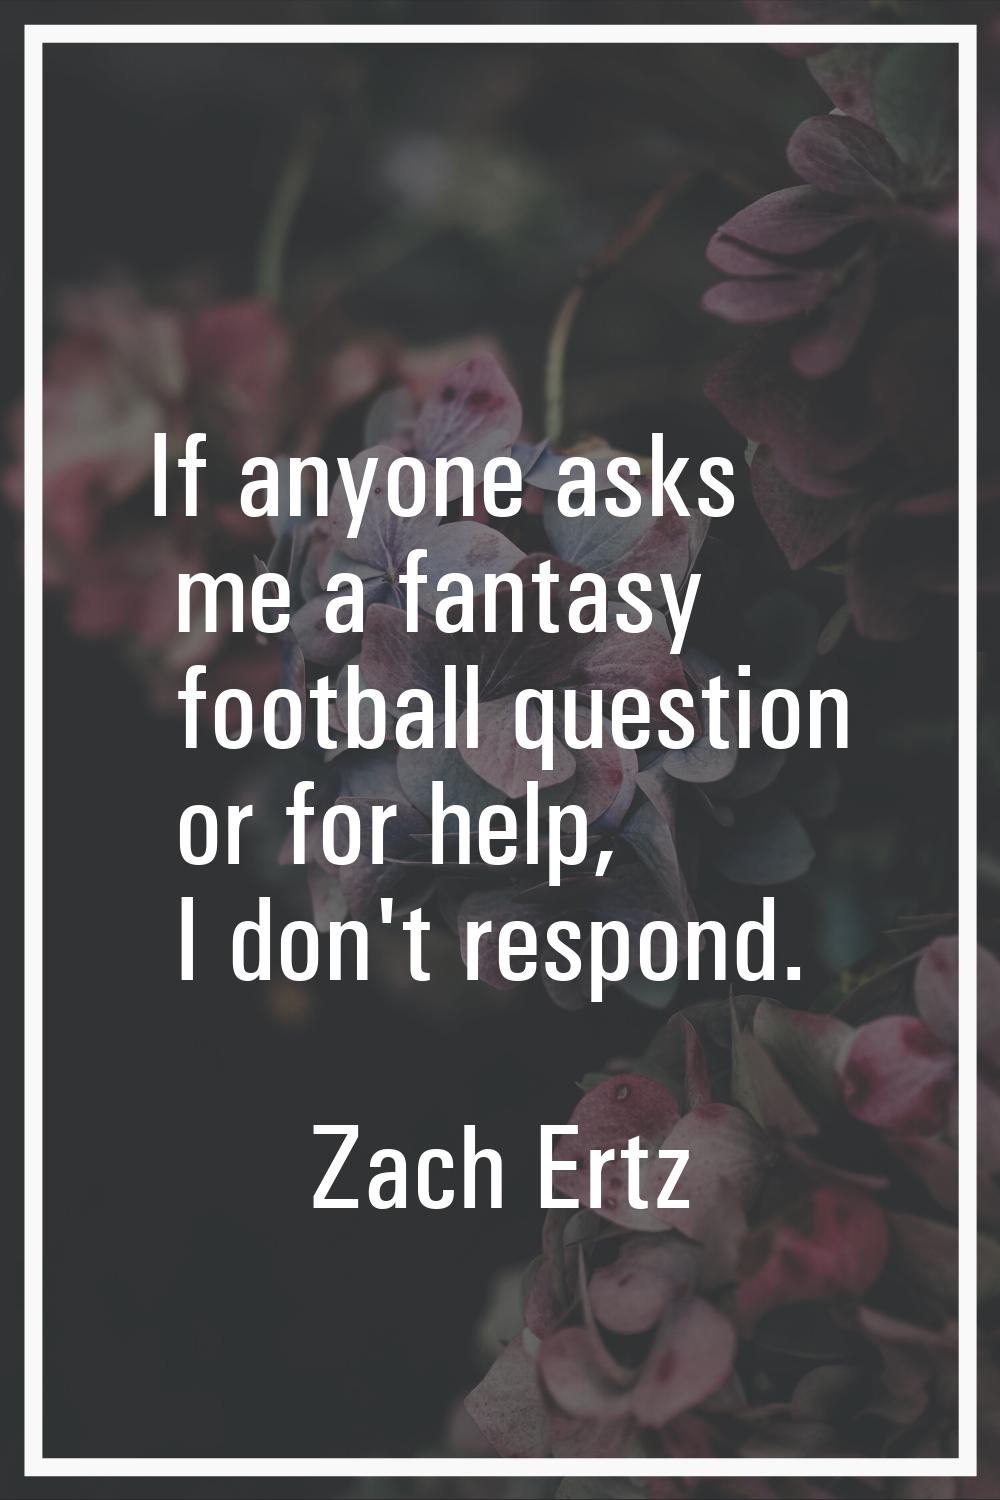 If anyone asks me a fantasy football question or for help, I don't respond.